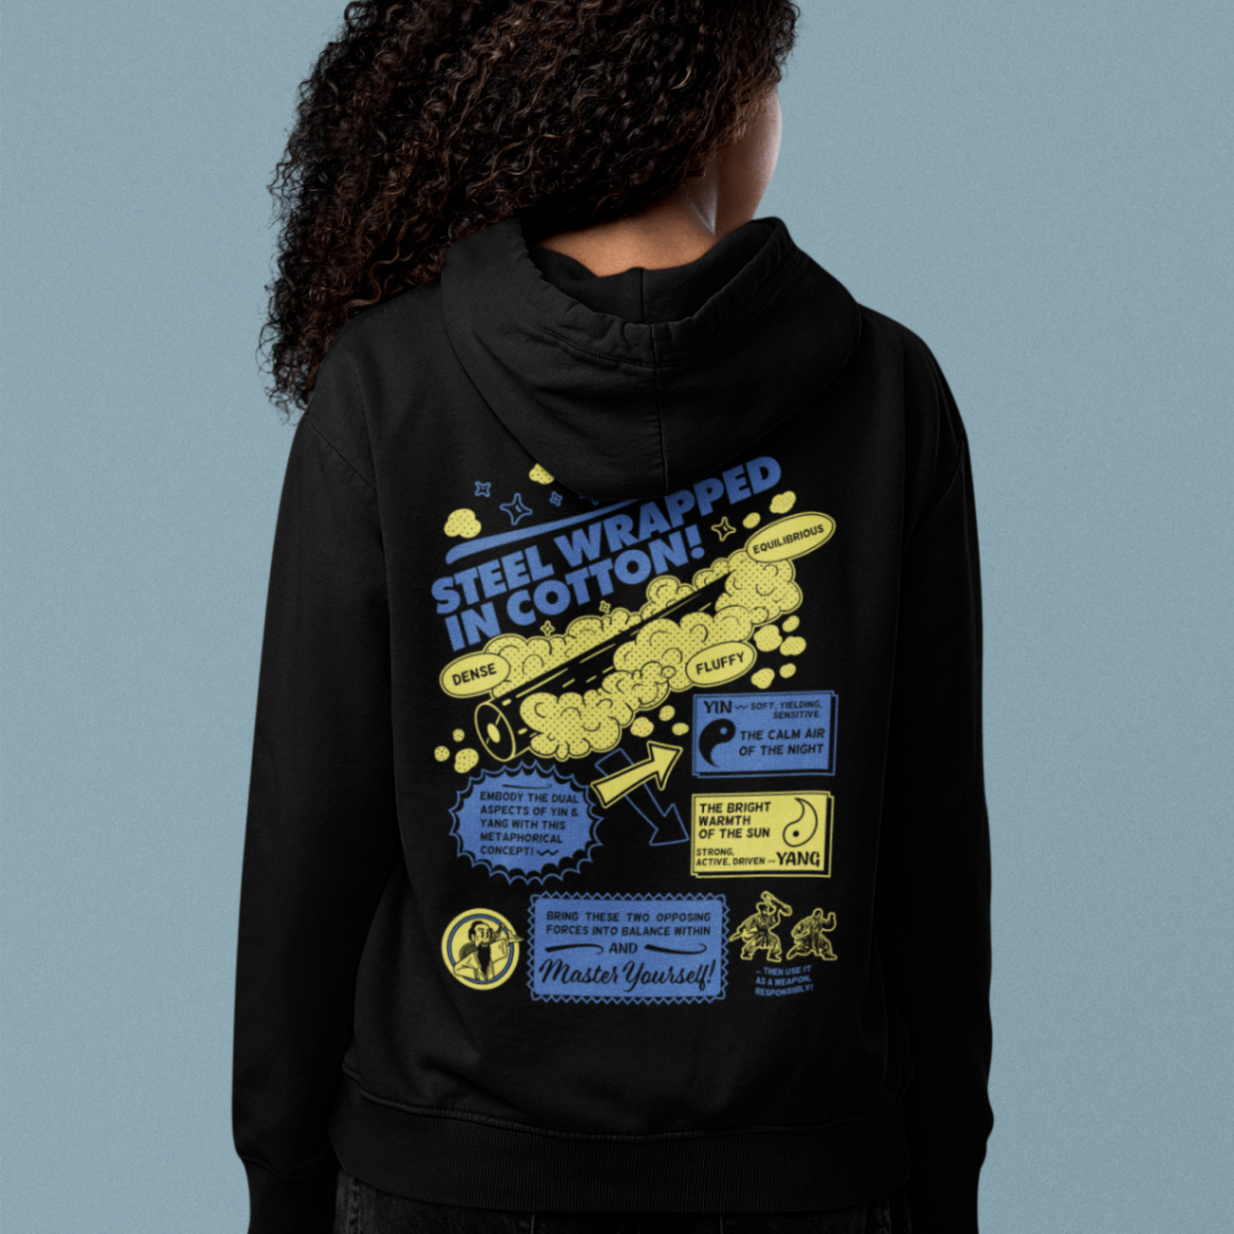 back view of a female model wearing a black zip up hoodie with steel wrapped in cotton design in yellow and navy text 